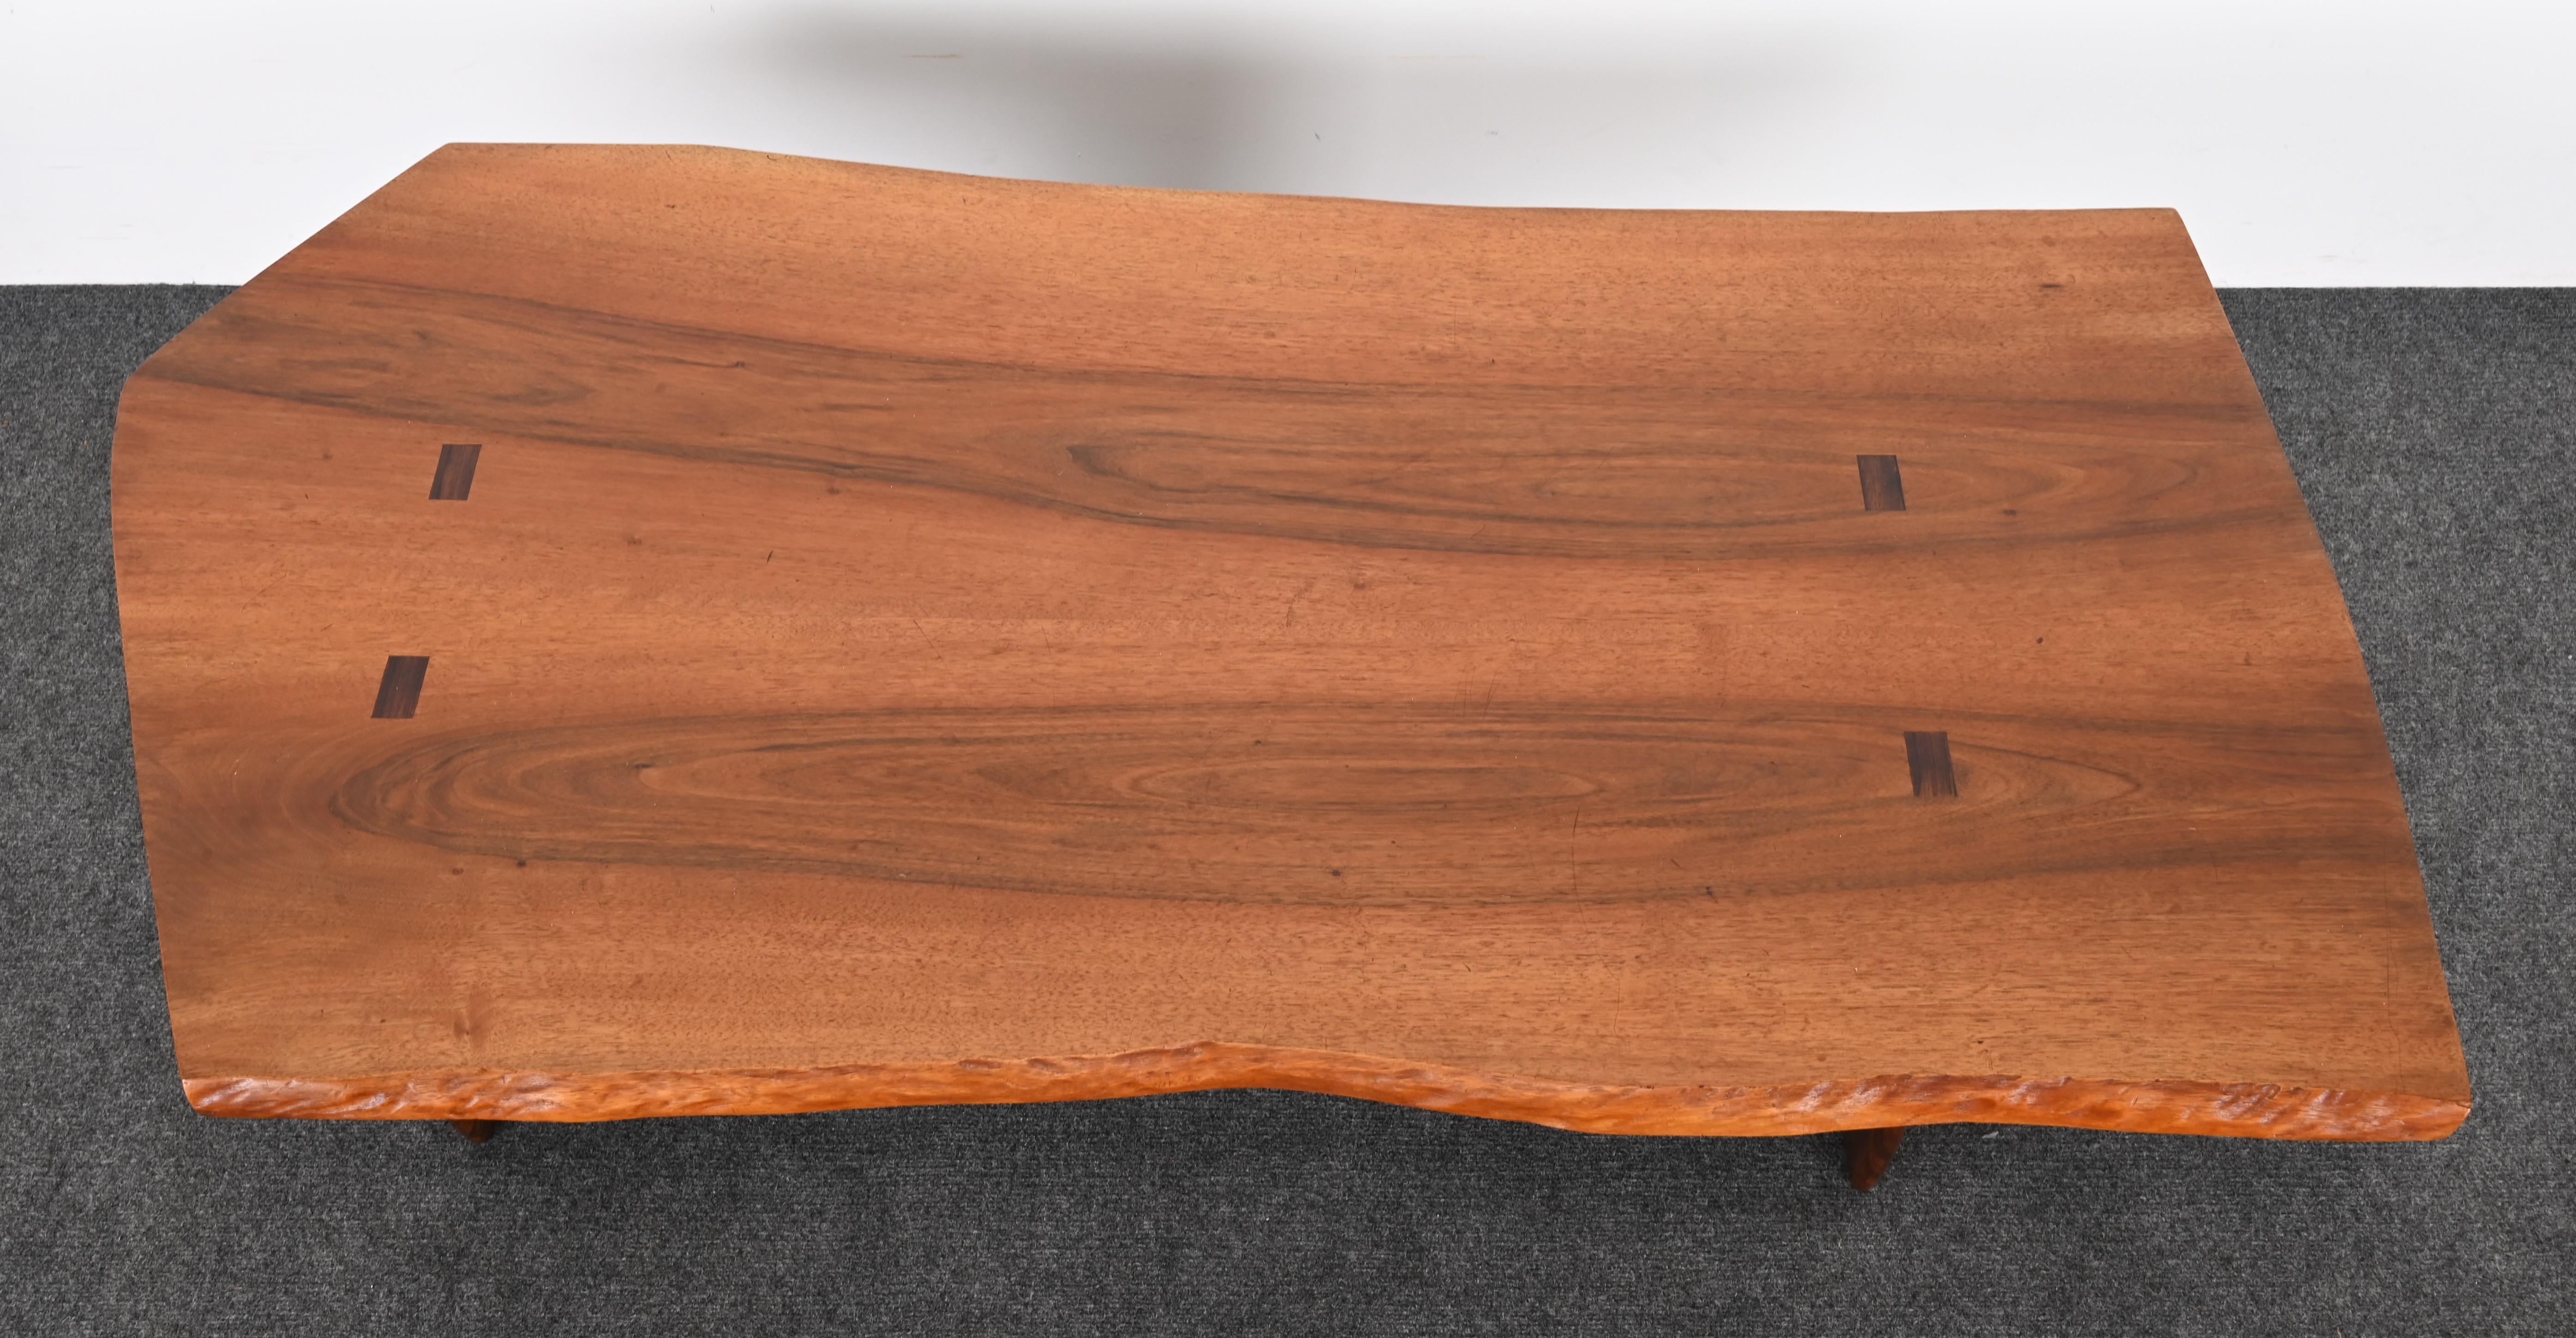 Live Edge Solid Walnut and Rosewood Coffee Table by Richard Rothbard, 1968 For Sale 11